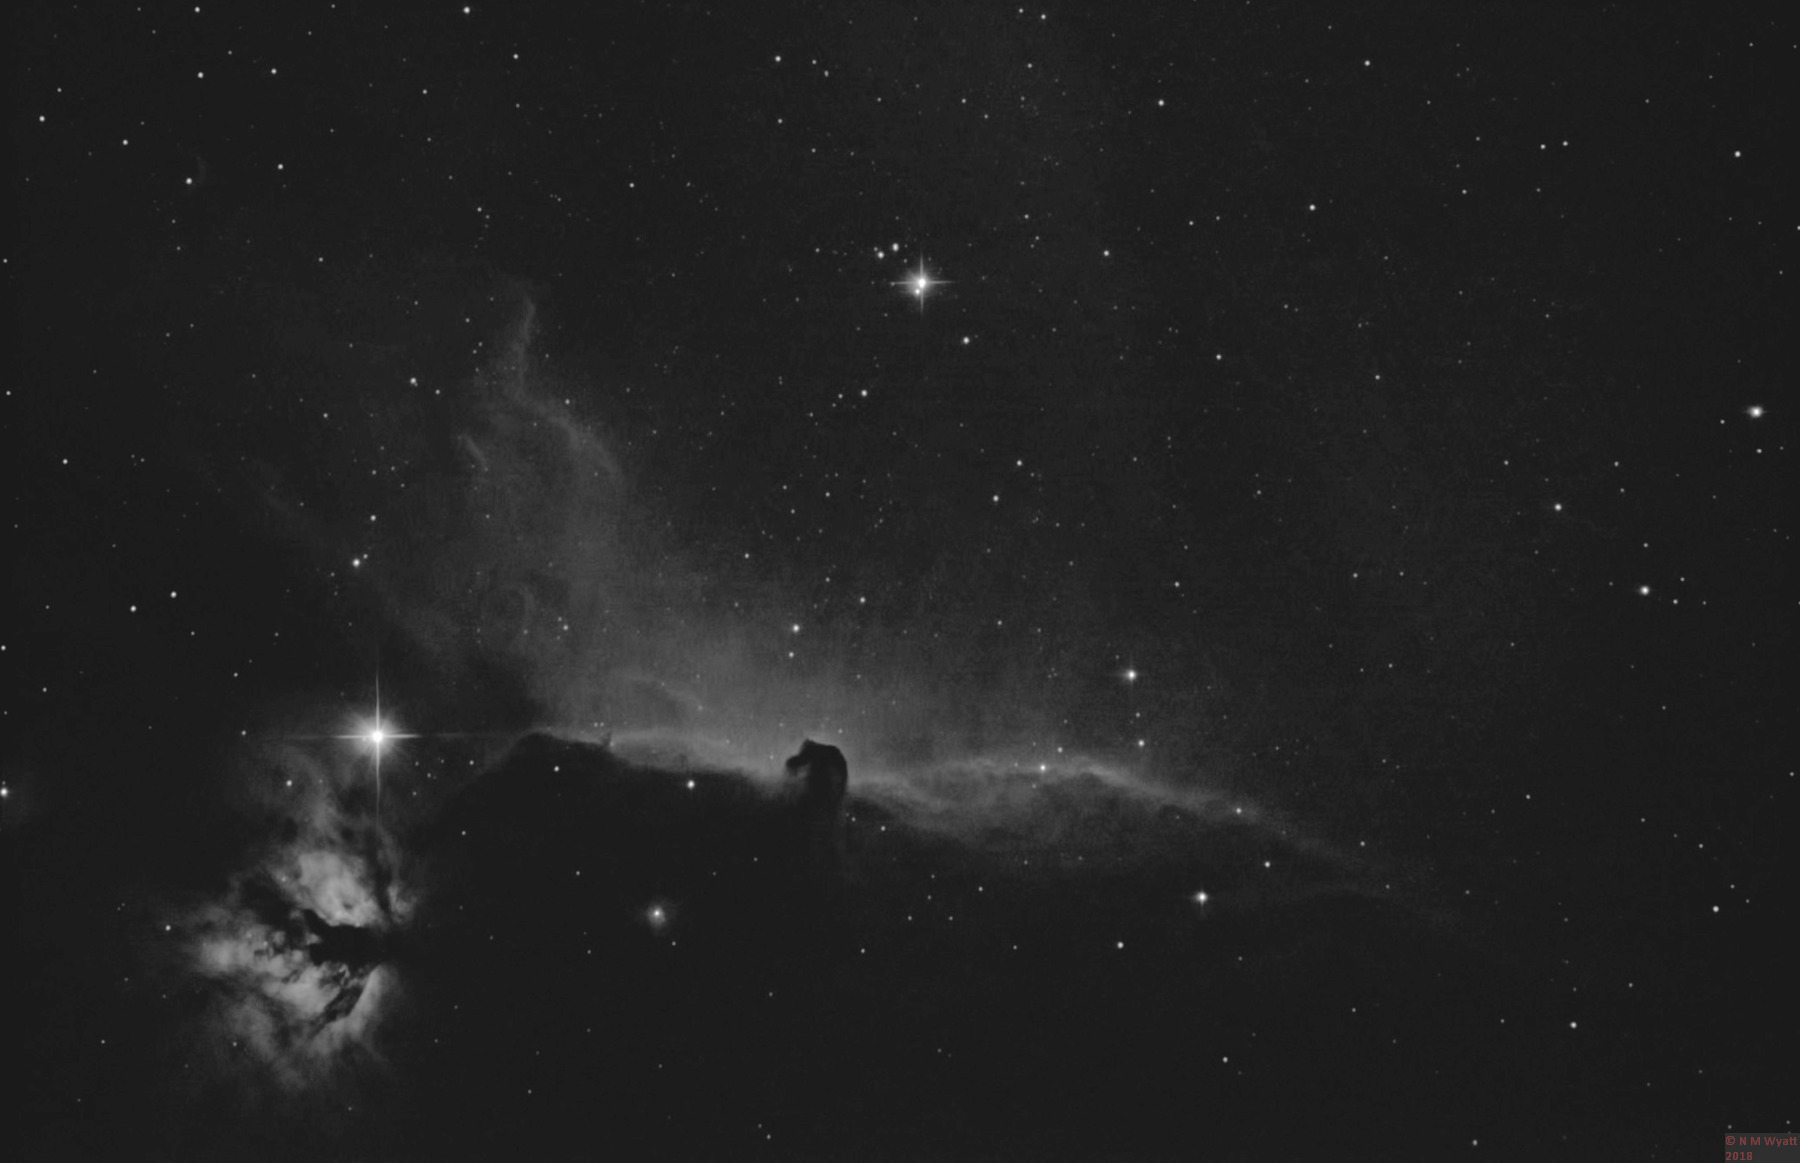 Horsehead and Flame nebulas in Hydrogen Alpha (Ha) light